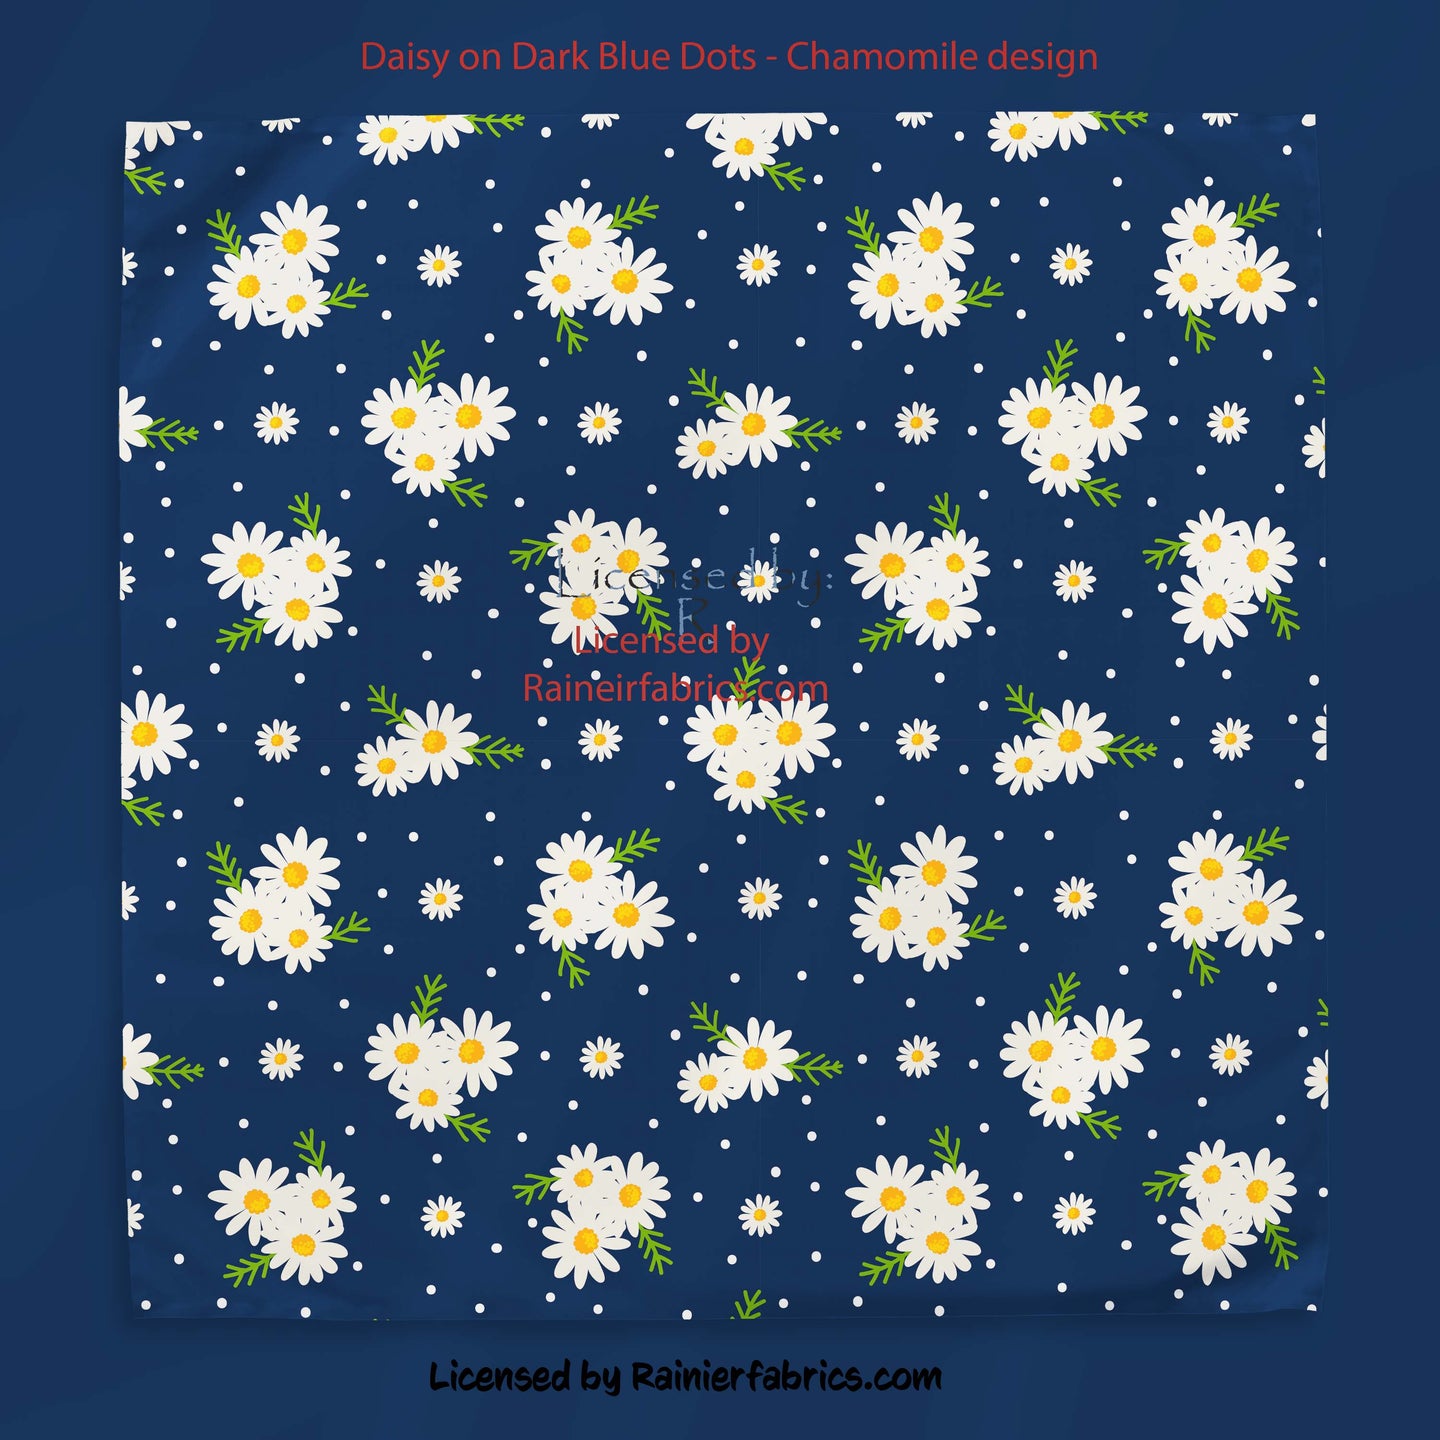 Daisy on Blue Dot - Chamomile design - 2-5 business days to ship - Order by 1/2 yard